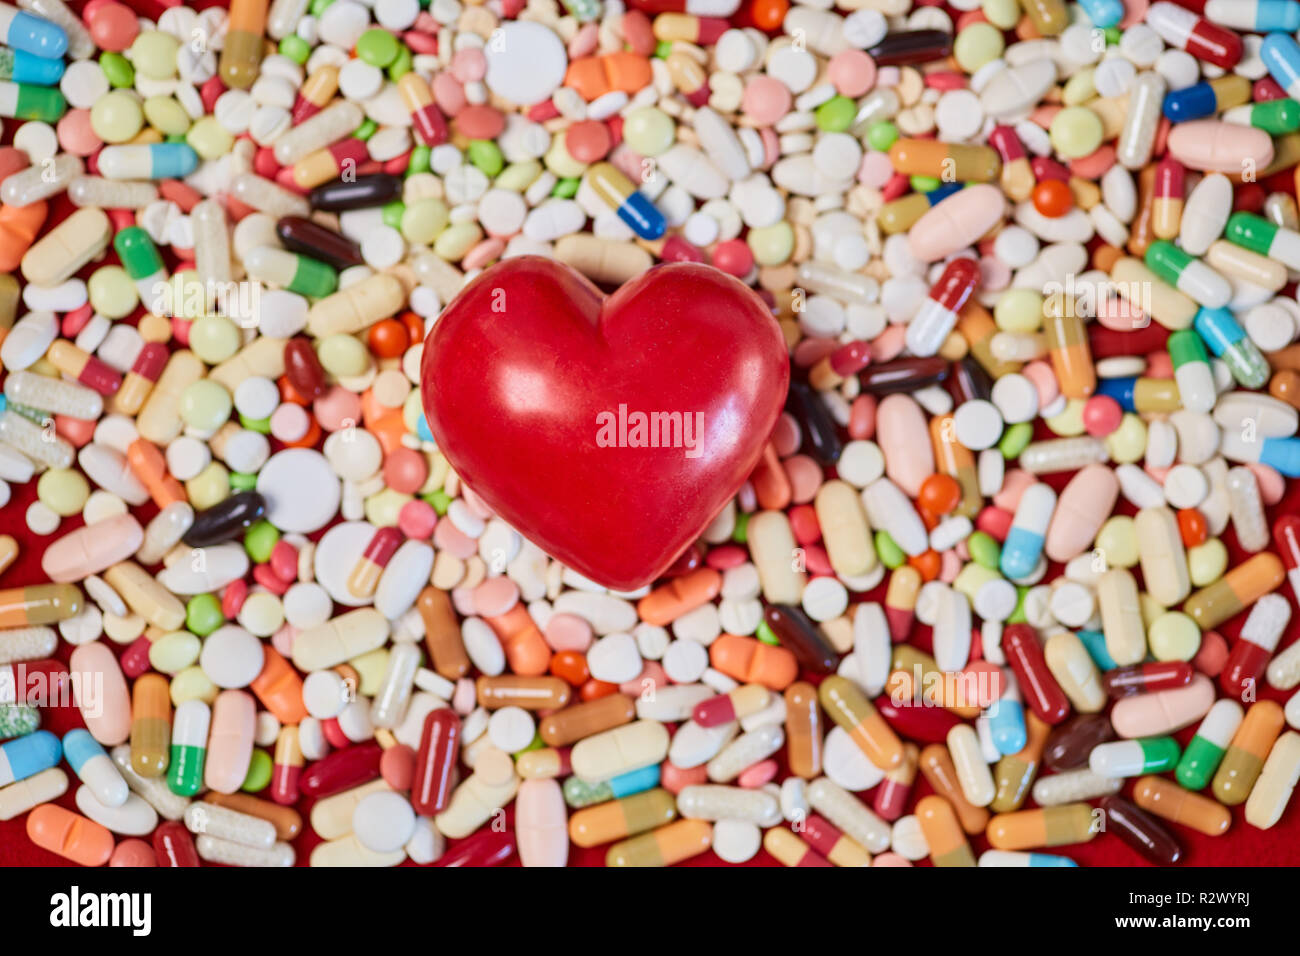 Red heart lies on many colorful medicines Stock Photo